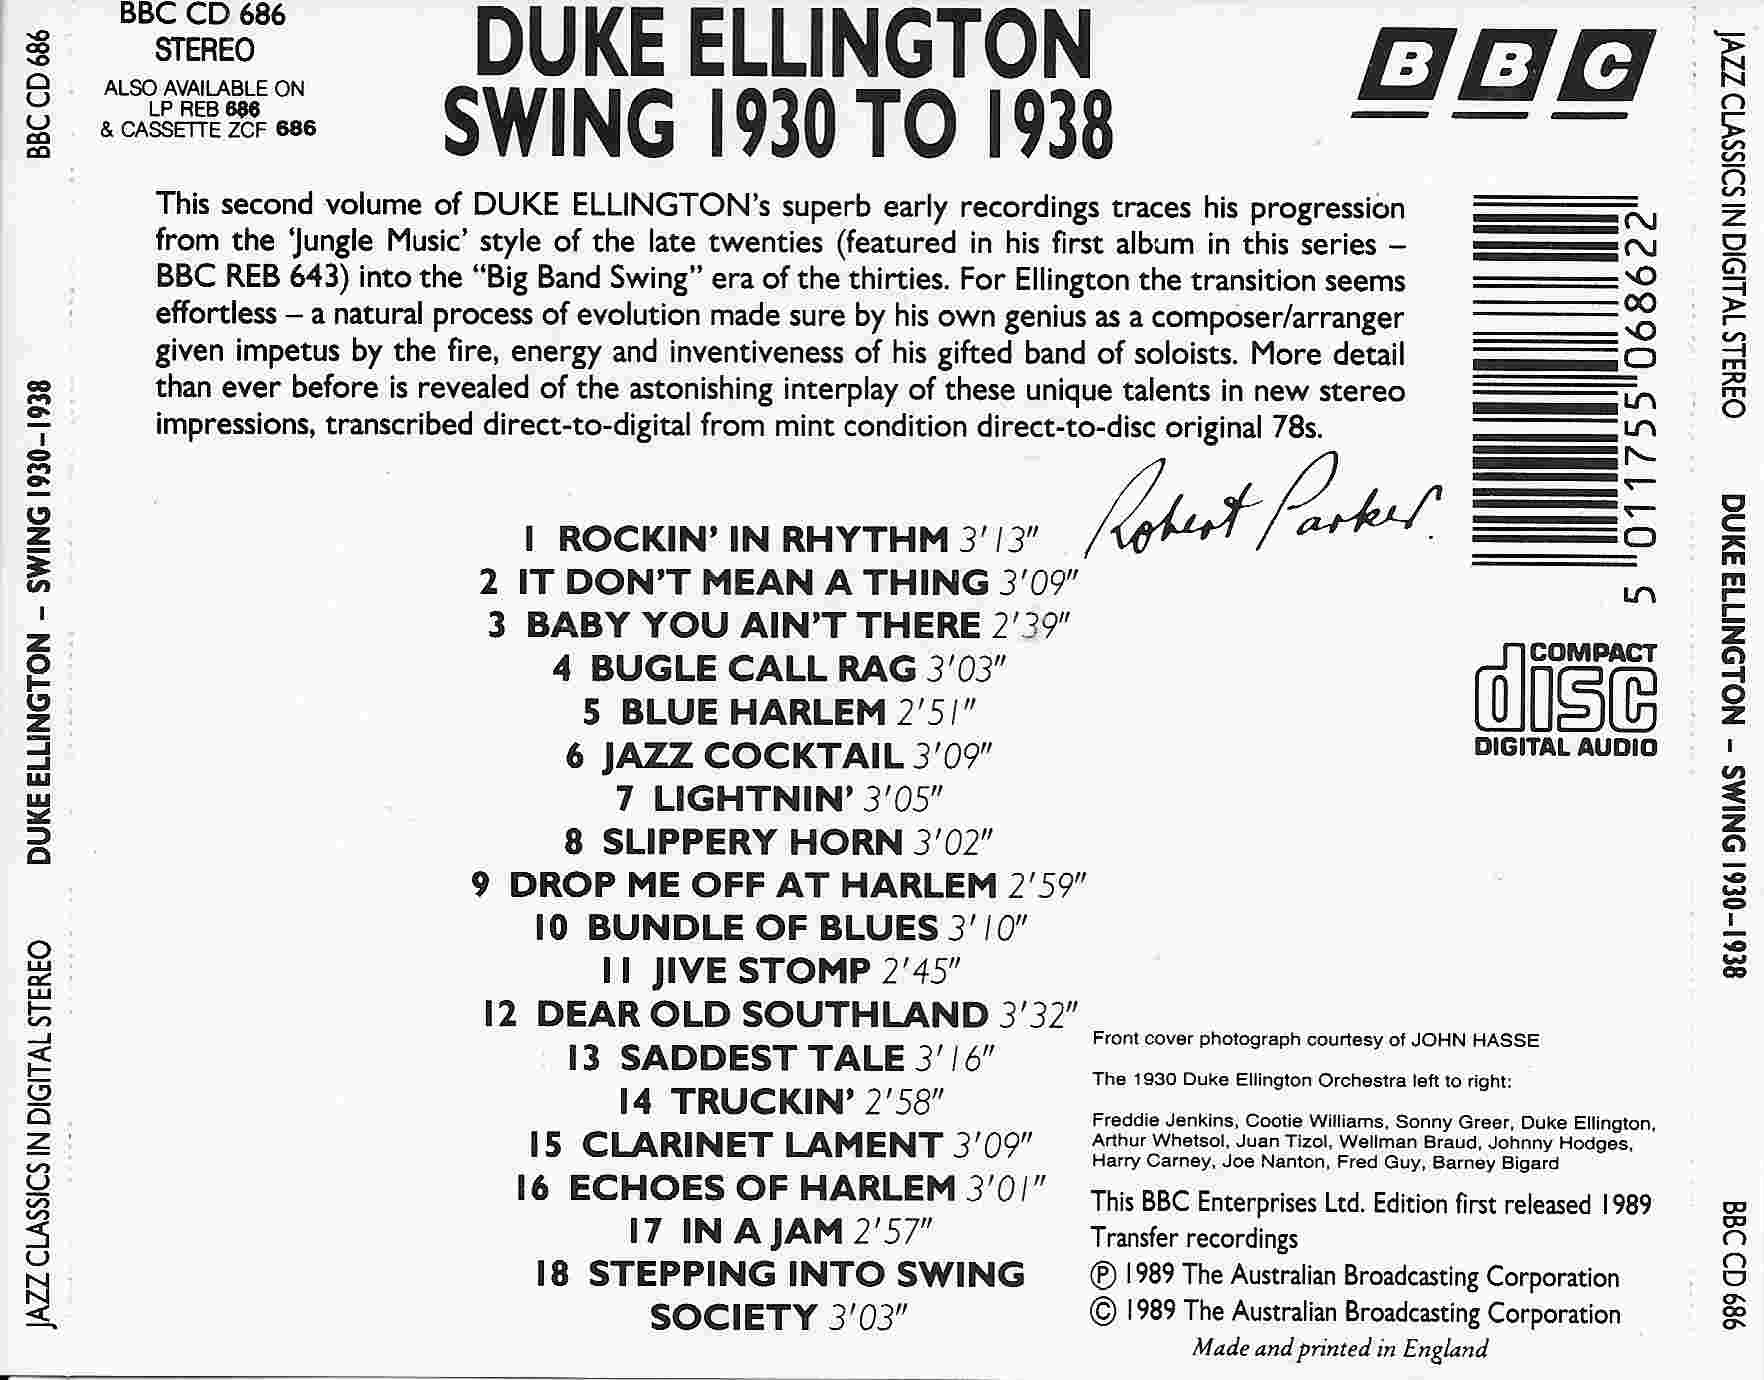 Picture of BBCCD686 Jazz classics - Duke Ellington by artist Duke Ellington from the BBC records and Tapes library